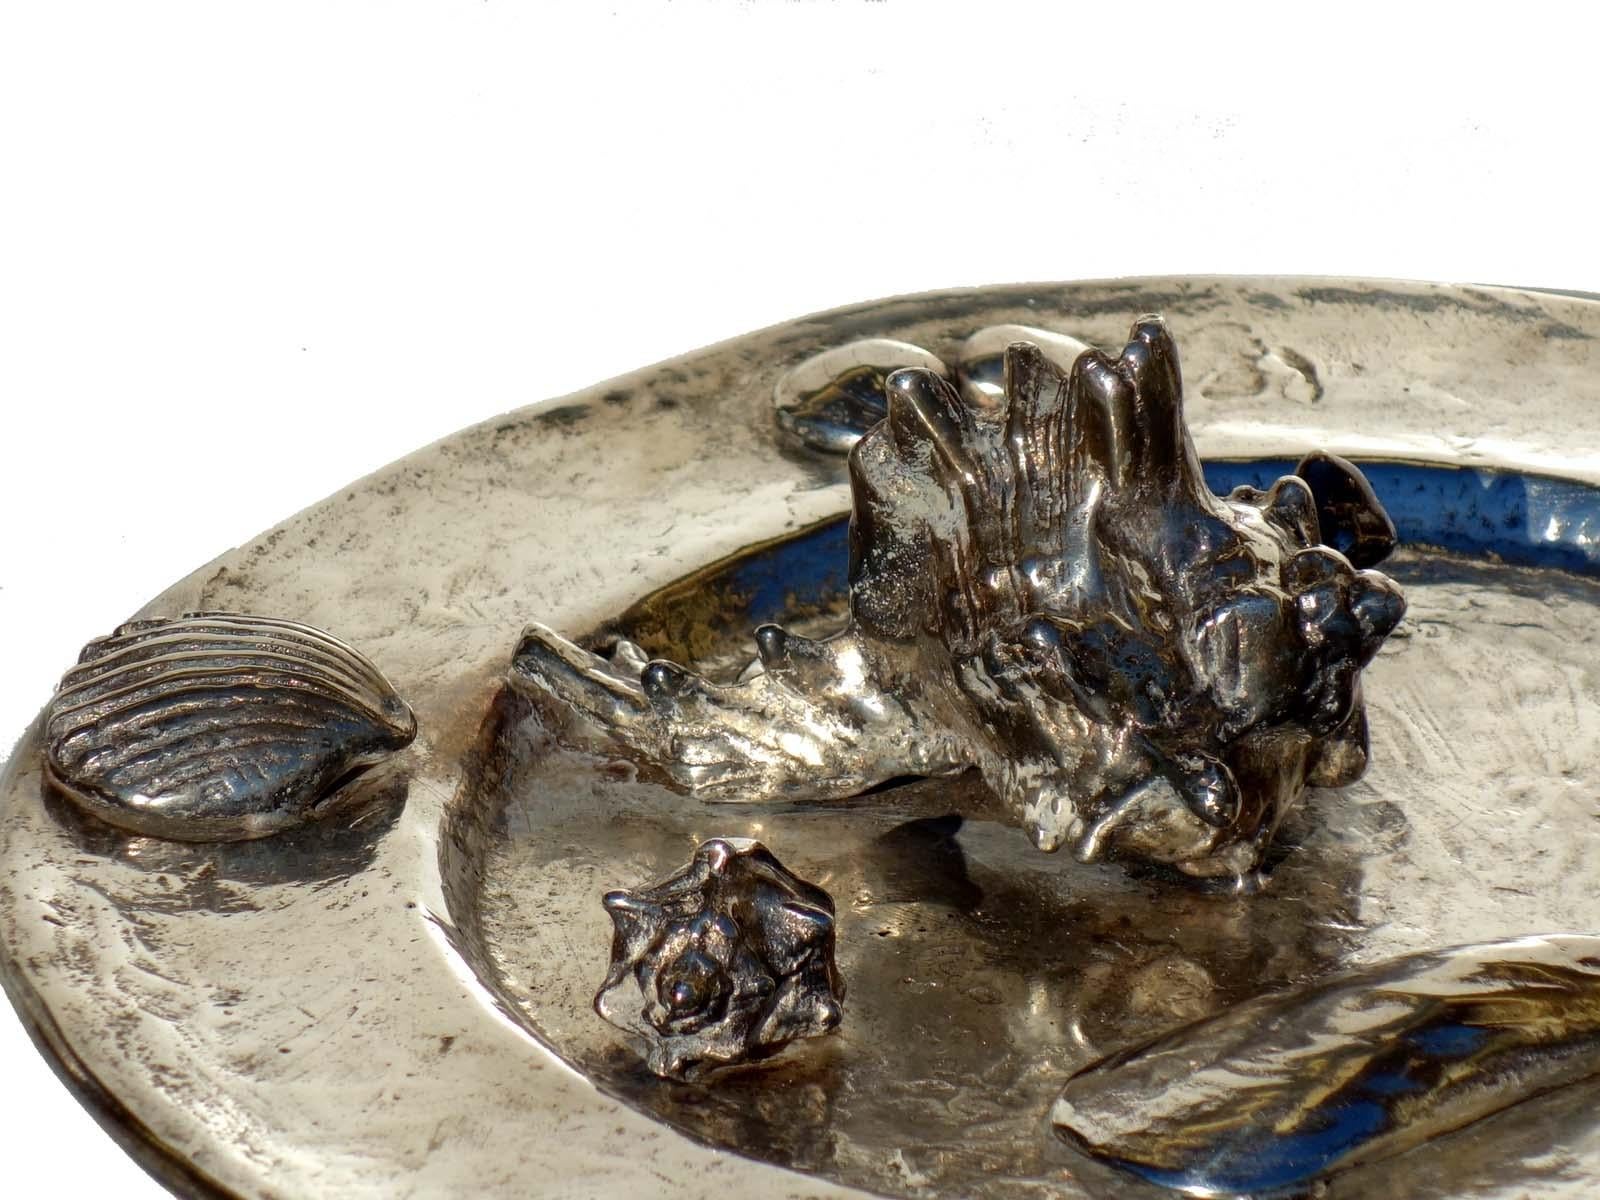 Sculpture plate
Italy, 1970

Silvered bronze  with embossed shells

weight: 4360 g
Perfect state of preservation